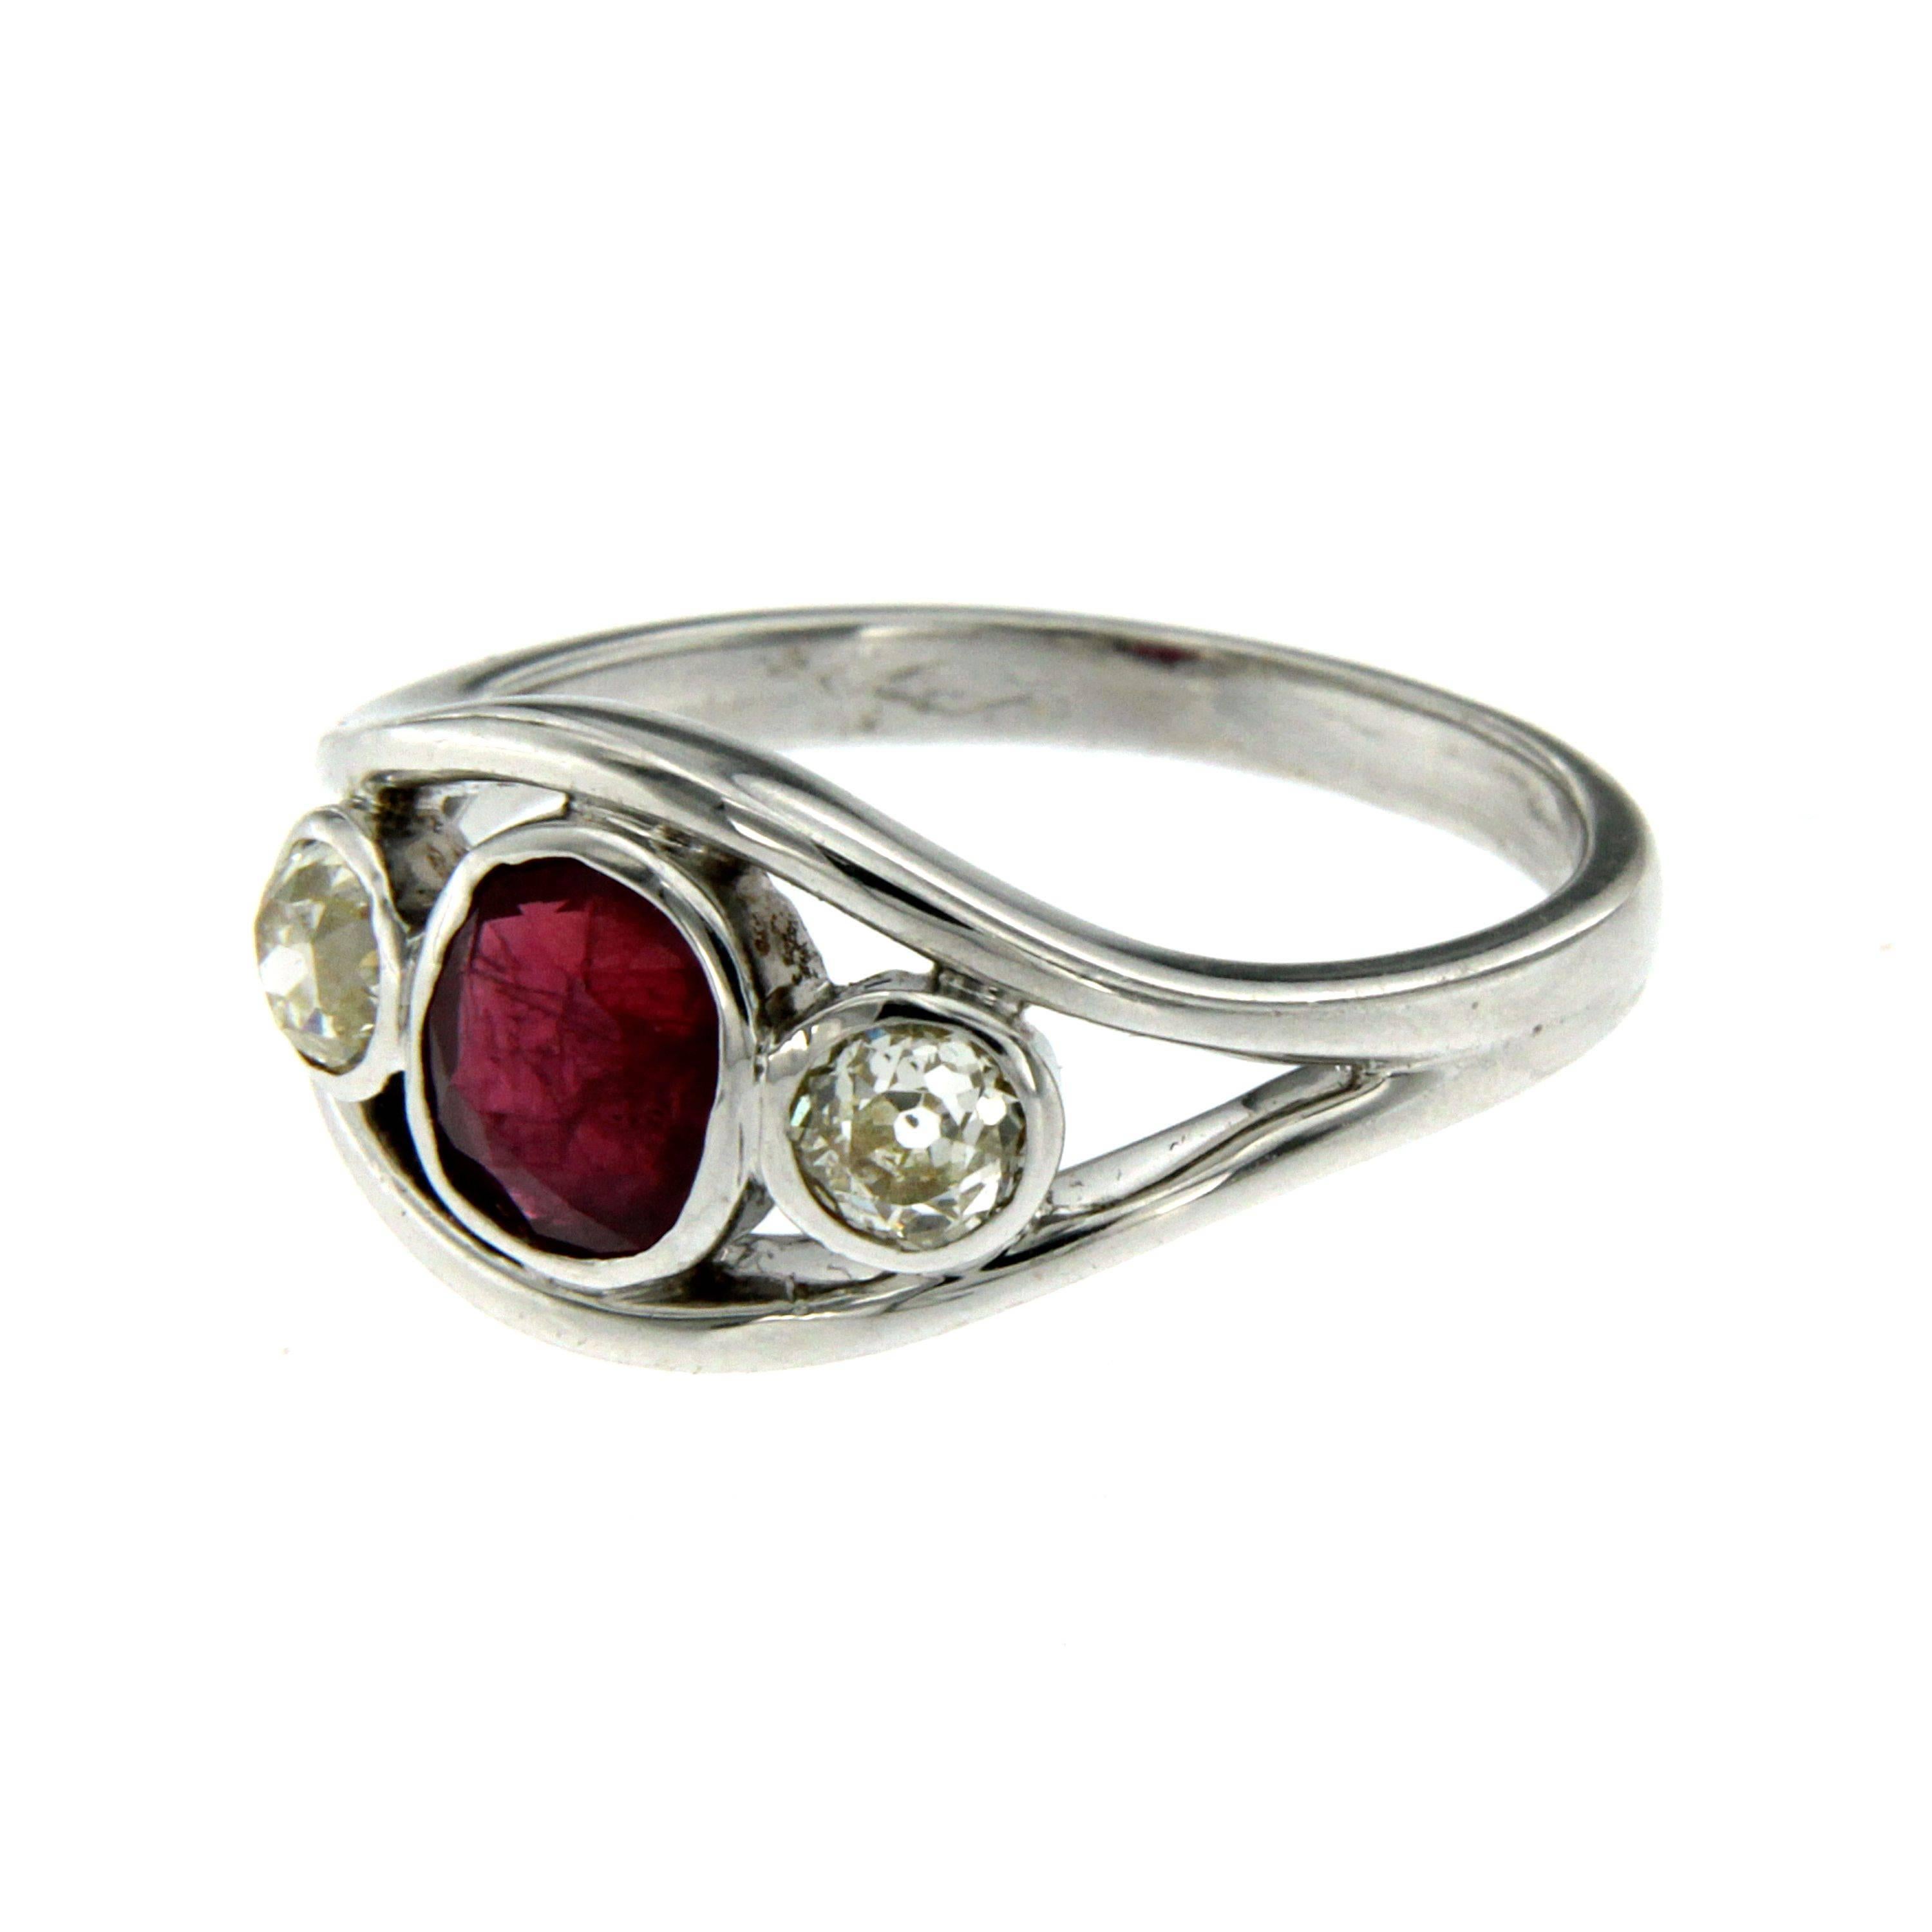 Beautiful 18k white gold ring (marked 750), set with an oval cut Ruby in the center, of absolute pleasure and color, weighing 1.26 carat, at the sides there are two Sparkling European cut Diamonds of 0.25 carat each, tot. 0.50 ct graded J/K color